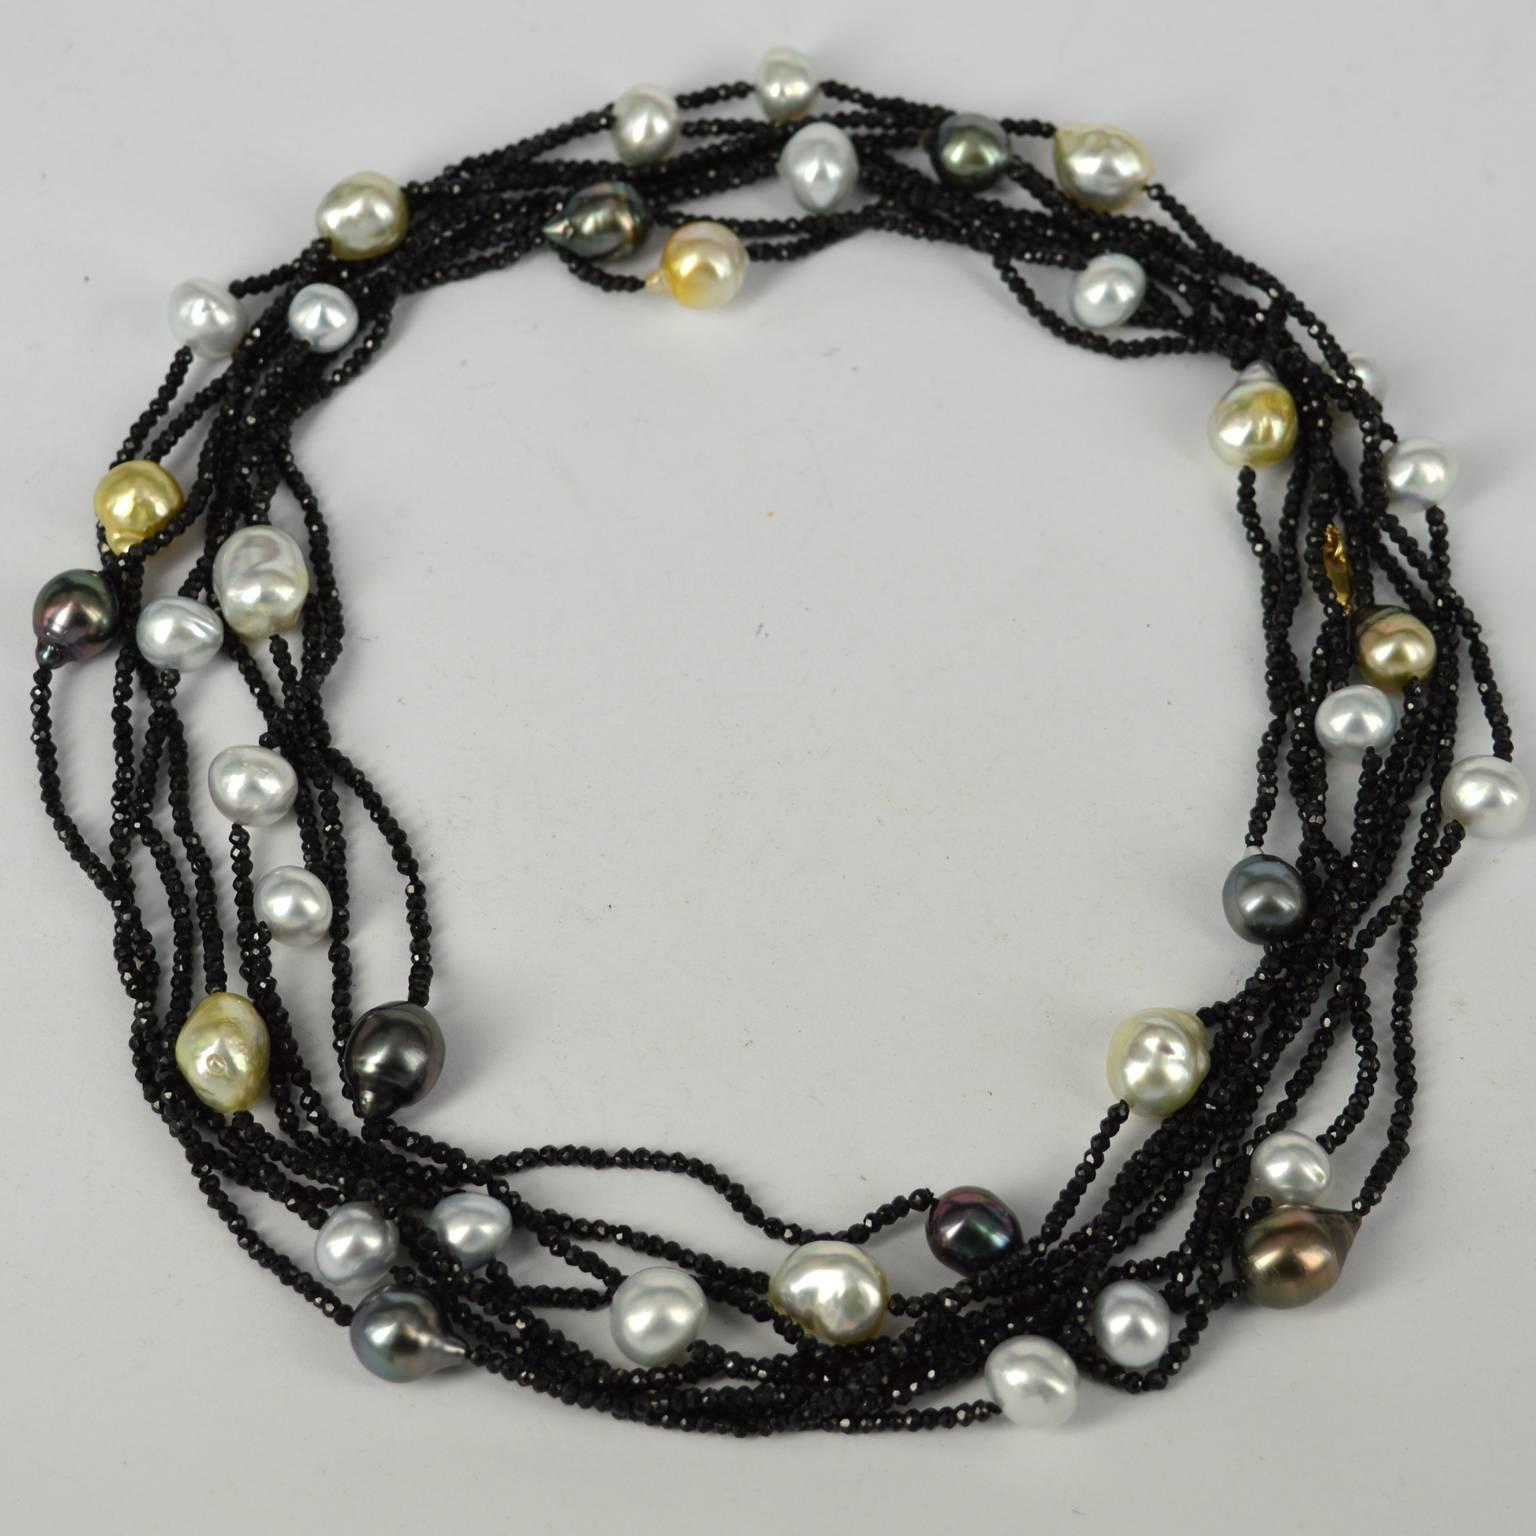 Extra long 4 metre necklace can be worn wrapped around the neck short or long or wrapped around the wrist many times.
11 strands of faceted 2mm black Spinel beads and 37 Pearls were used to make this stunning piece, knotted every 10mm for strength